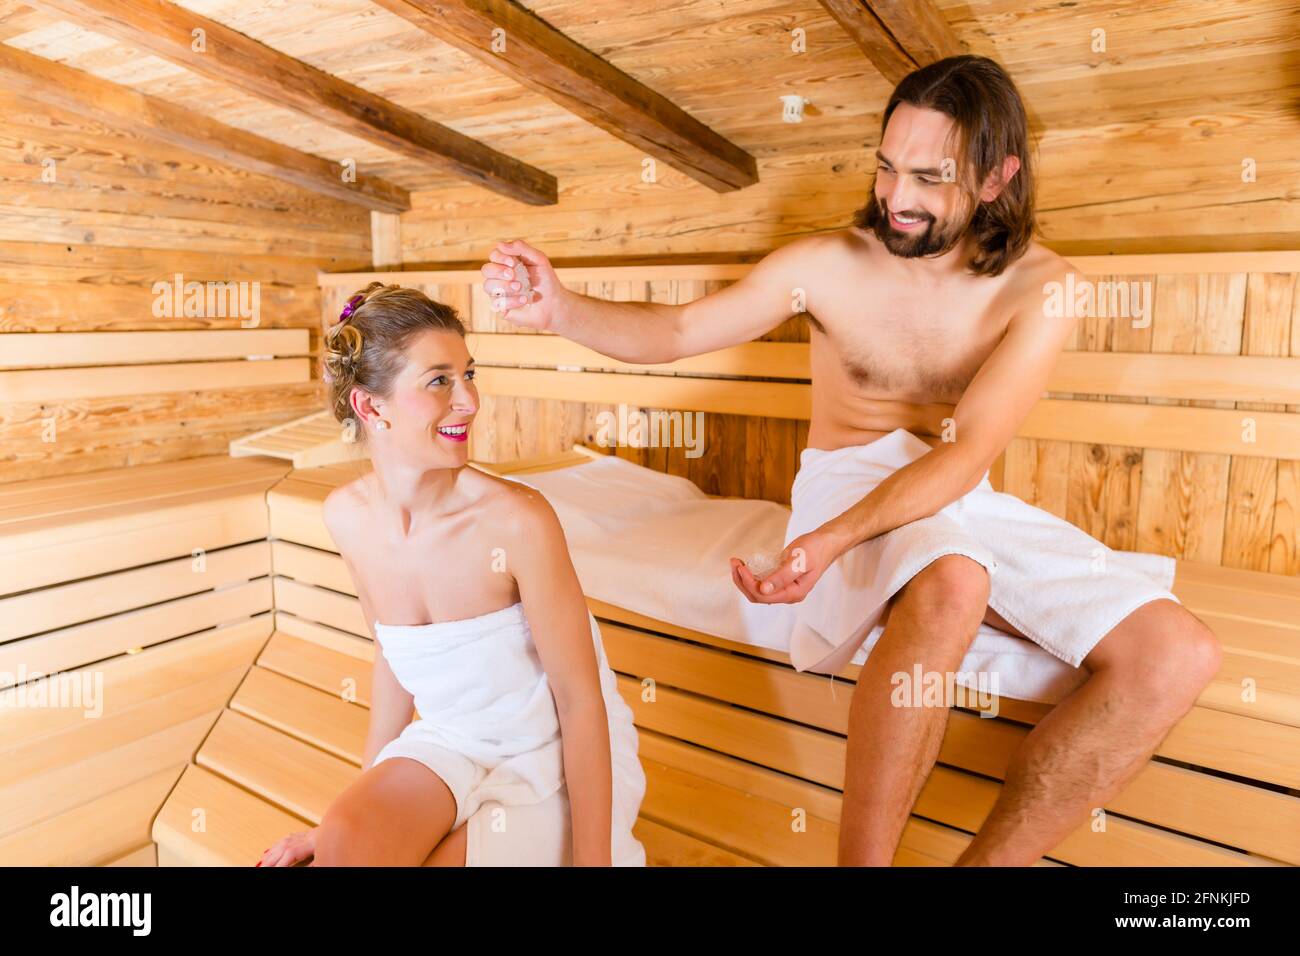 Couple relaxing together in wellness spa sauna with ice to cool down Stock Photo